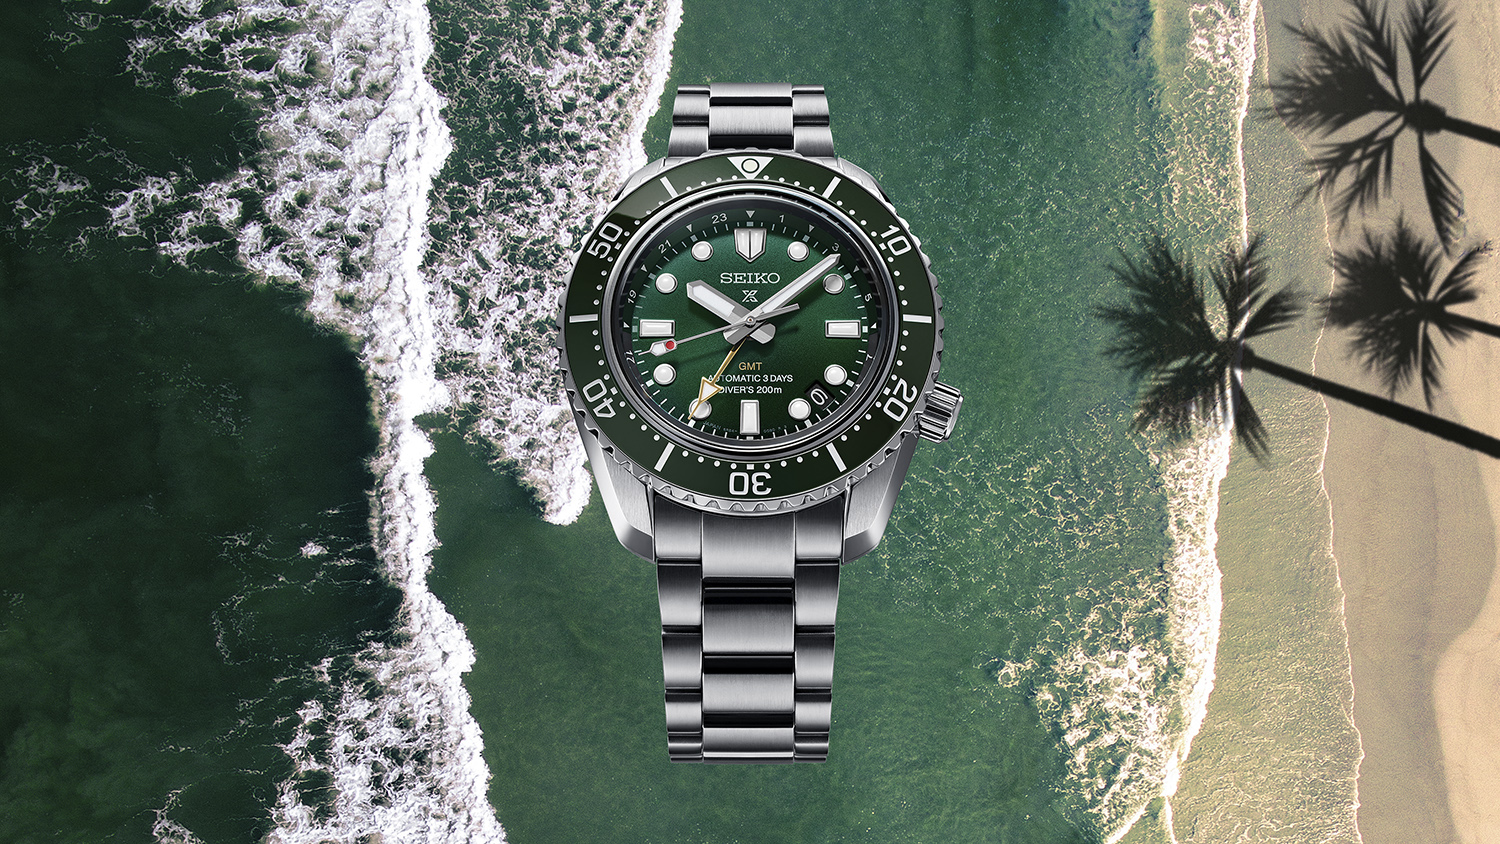 Gedwongen waterval Oude tijden Powered by a new three-day movement, a mechanical GMT diver's watch joins  the Seiko Prospex collection for the first time. | Seiko Watch Corporation